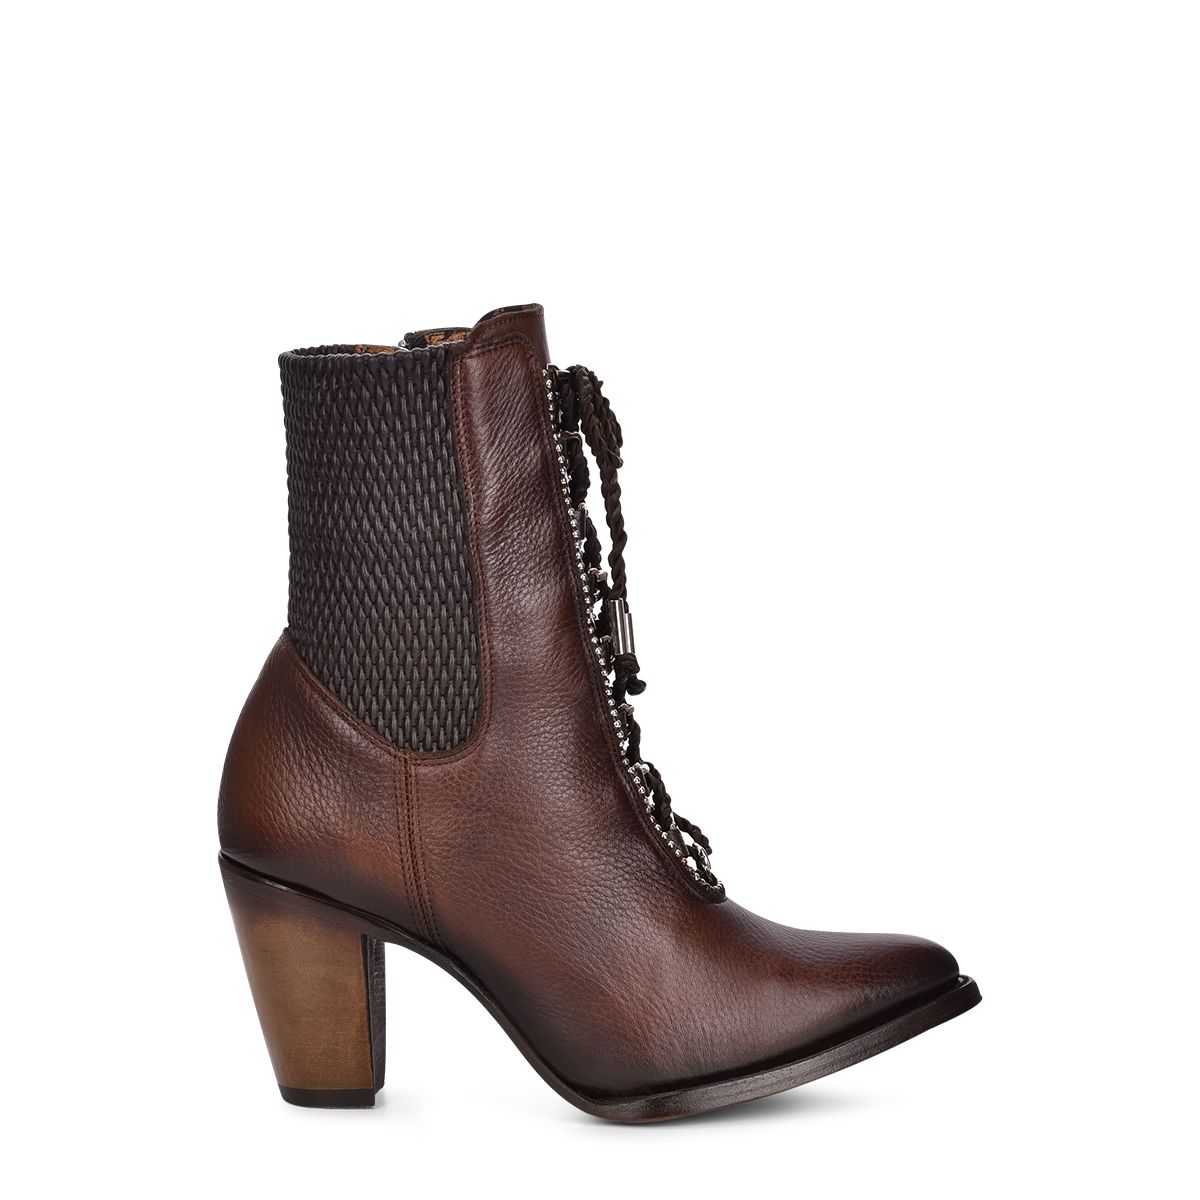 3F84RS - Cuadra chocolate Paris Texas cowboy leather ankle boots for women-Kuet.us